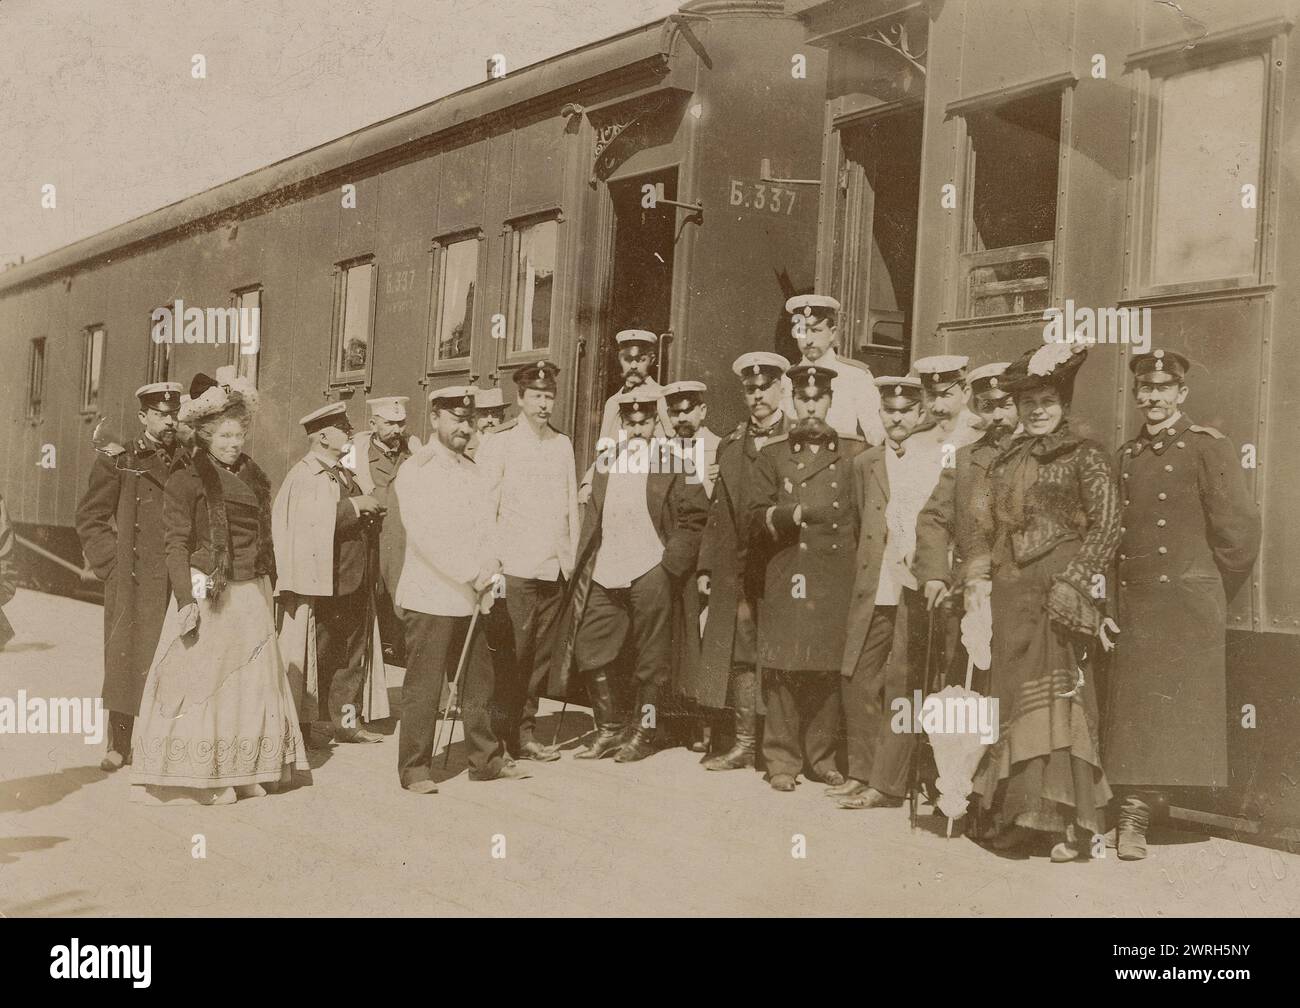 Railway employees against the background of train cars, 1910-1919. From a collection of 136 photographs of Irkutsk from the late nineteenth and early twentieth centuries. The photographs show views of both the city of Irkutsk and countryside of Irkutsk Province; methods of transportation; and the citizenry, including their way of life, social activities, and forms of entertainment. Irkutsk Municipal History Museum Stock Photo